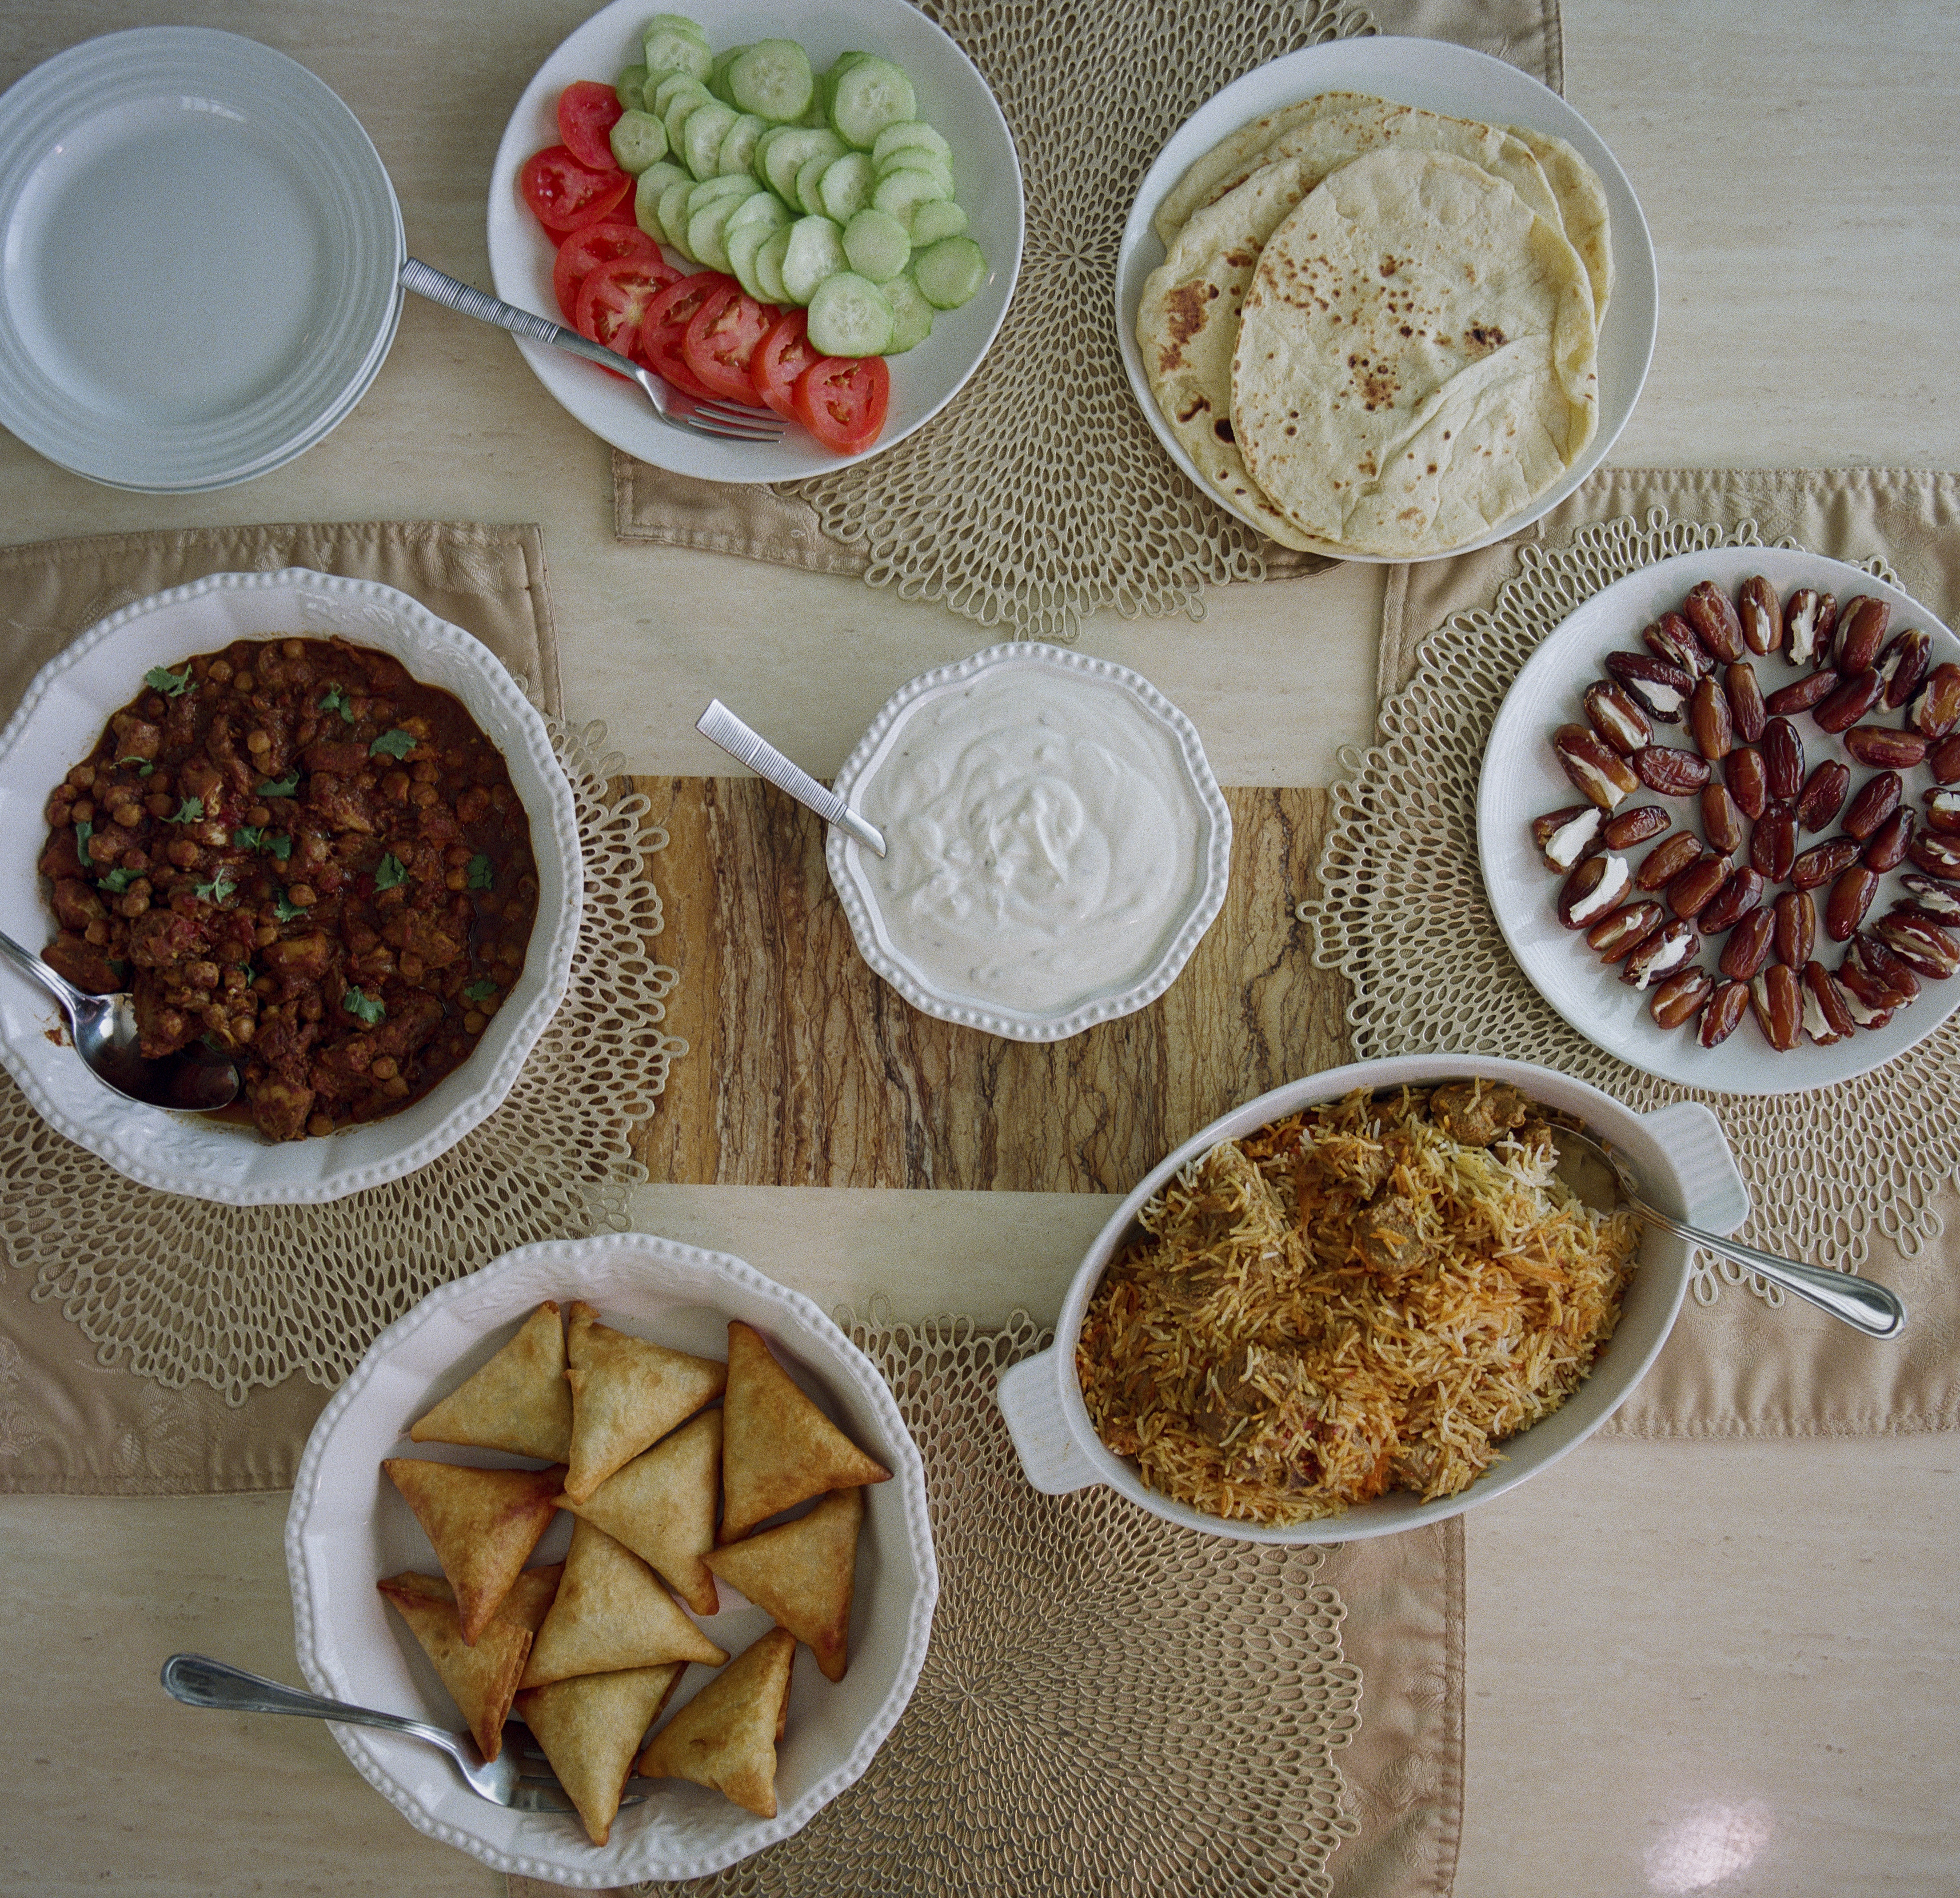 When the Joneses break the fast during Ramadan, their favorites include (clockwise from left) chickpea curry, fresh vegetables, naan, stuffed dates, biryani beef samosas and (center) raita.